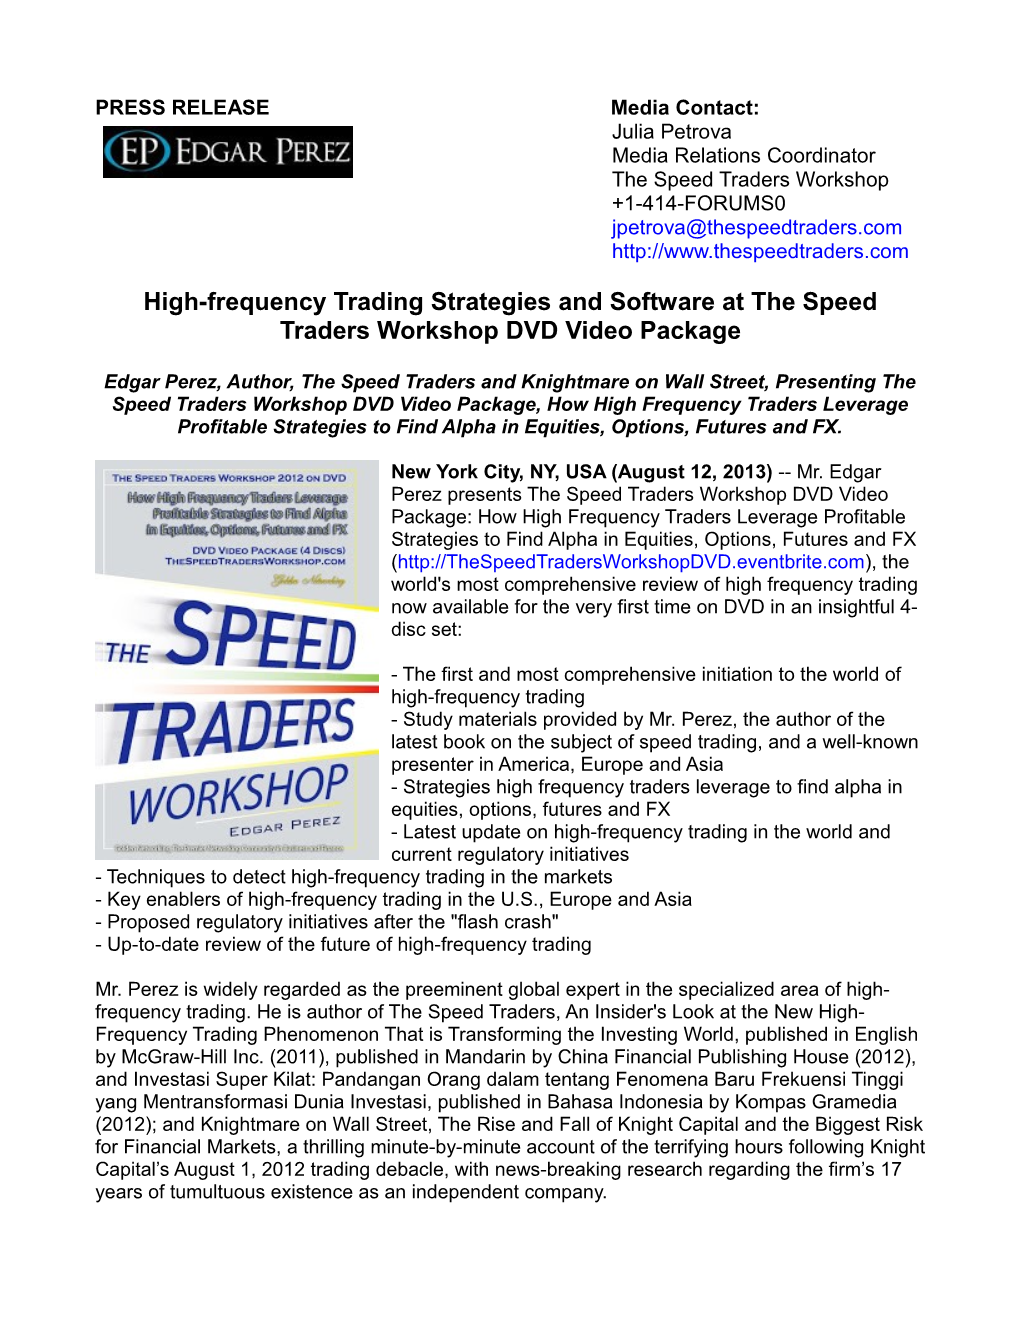 High-Frequency Trading Strategies and Software at the Speed Traders Workshop DVD Video Package